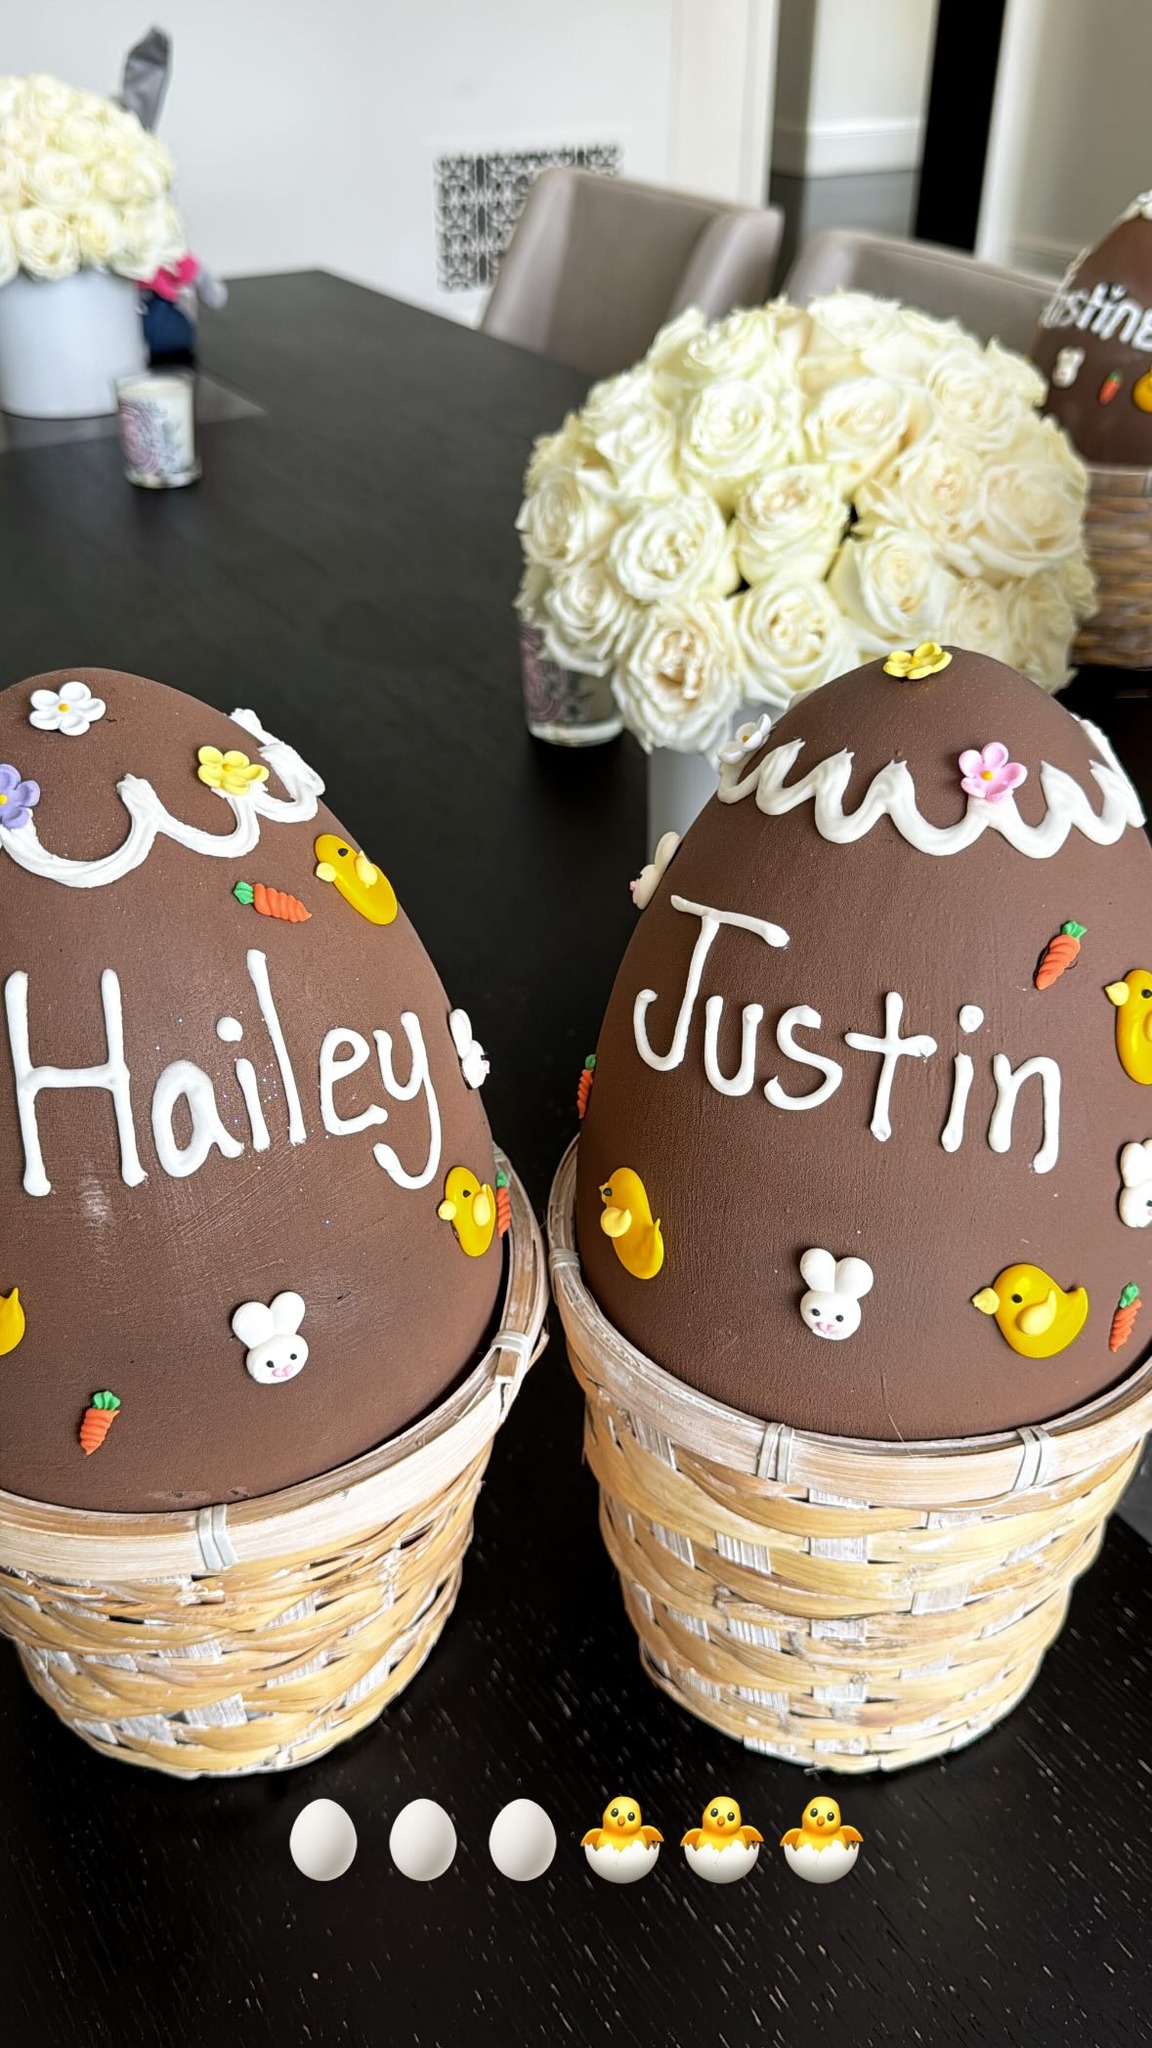 The model squashed divorce rumors by posting Easter gifts with both her and Justin's names